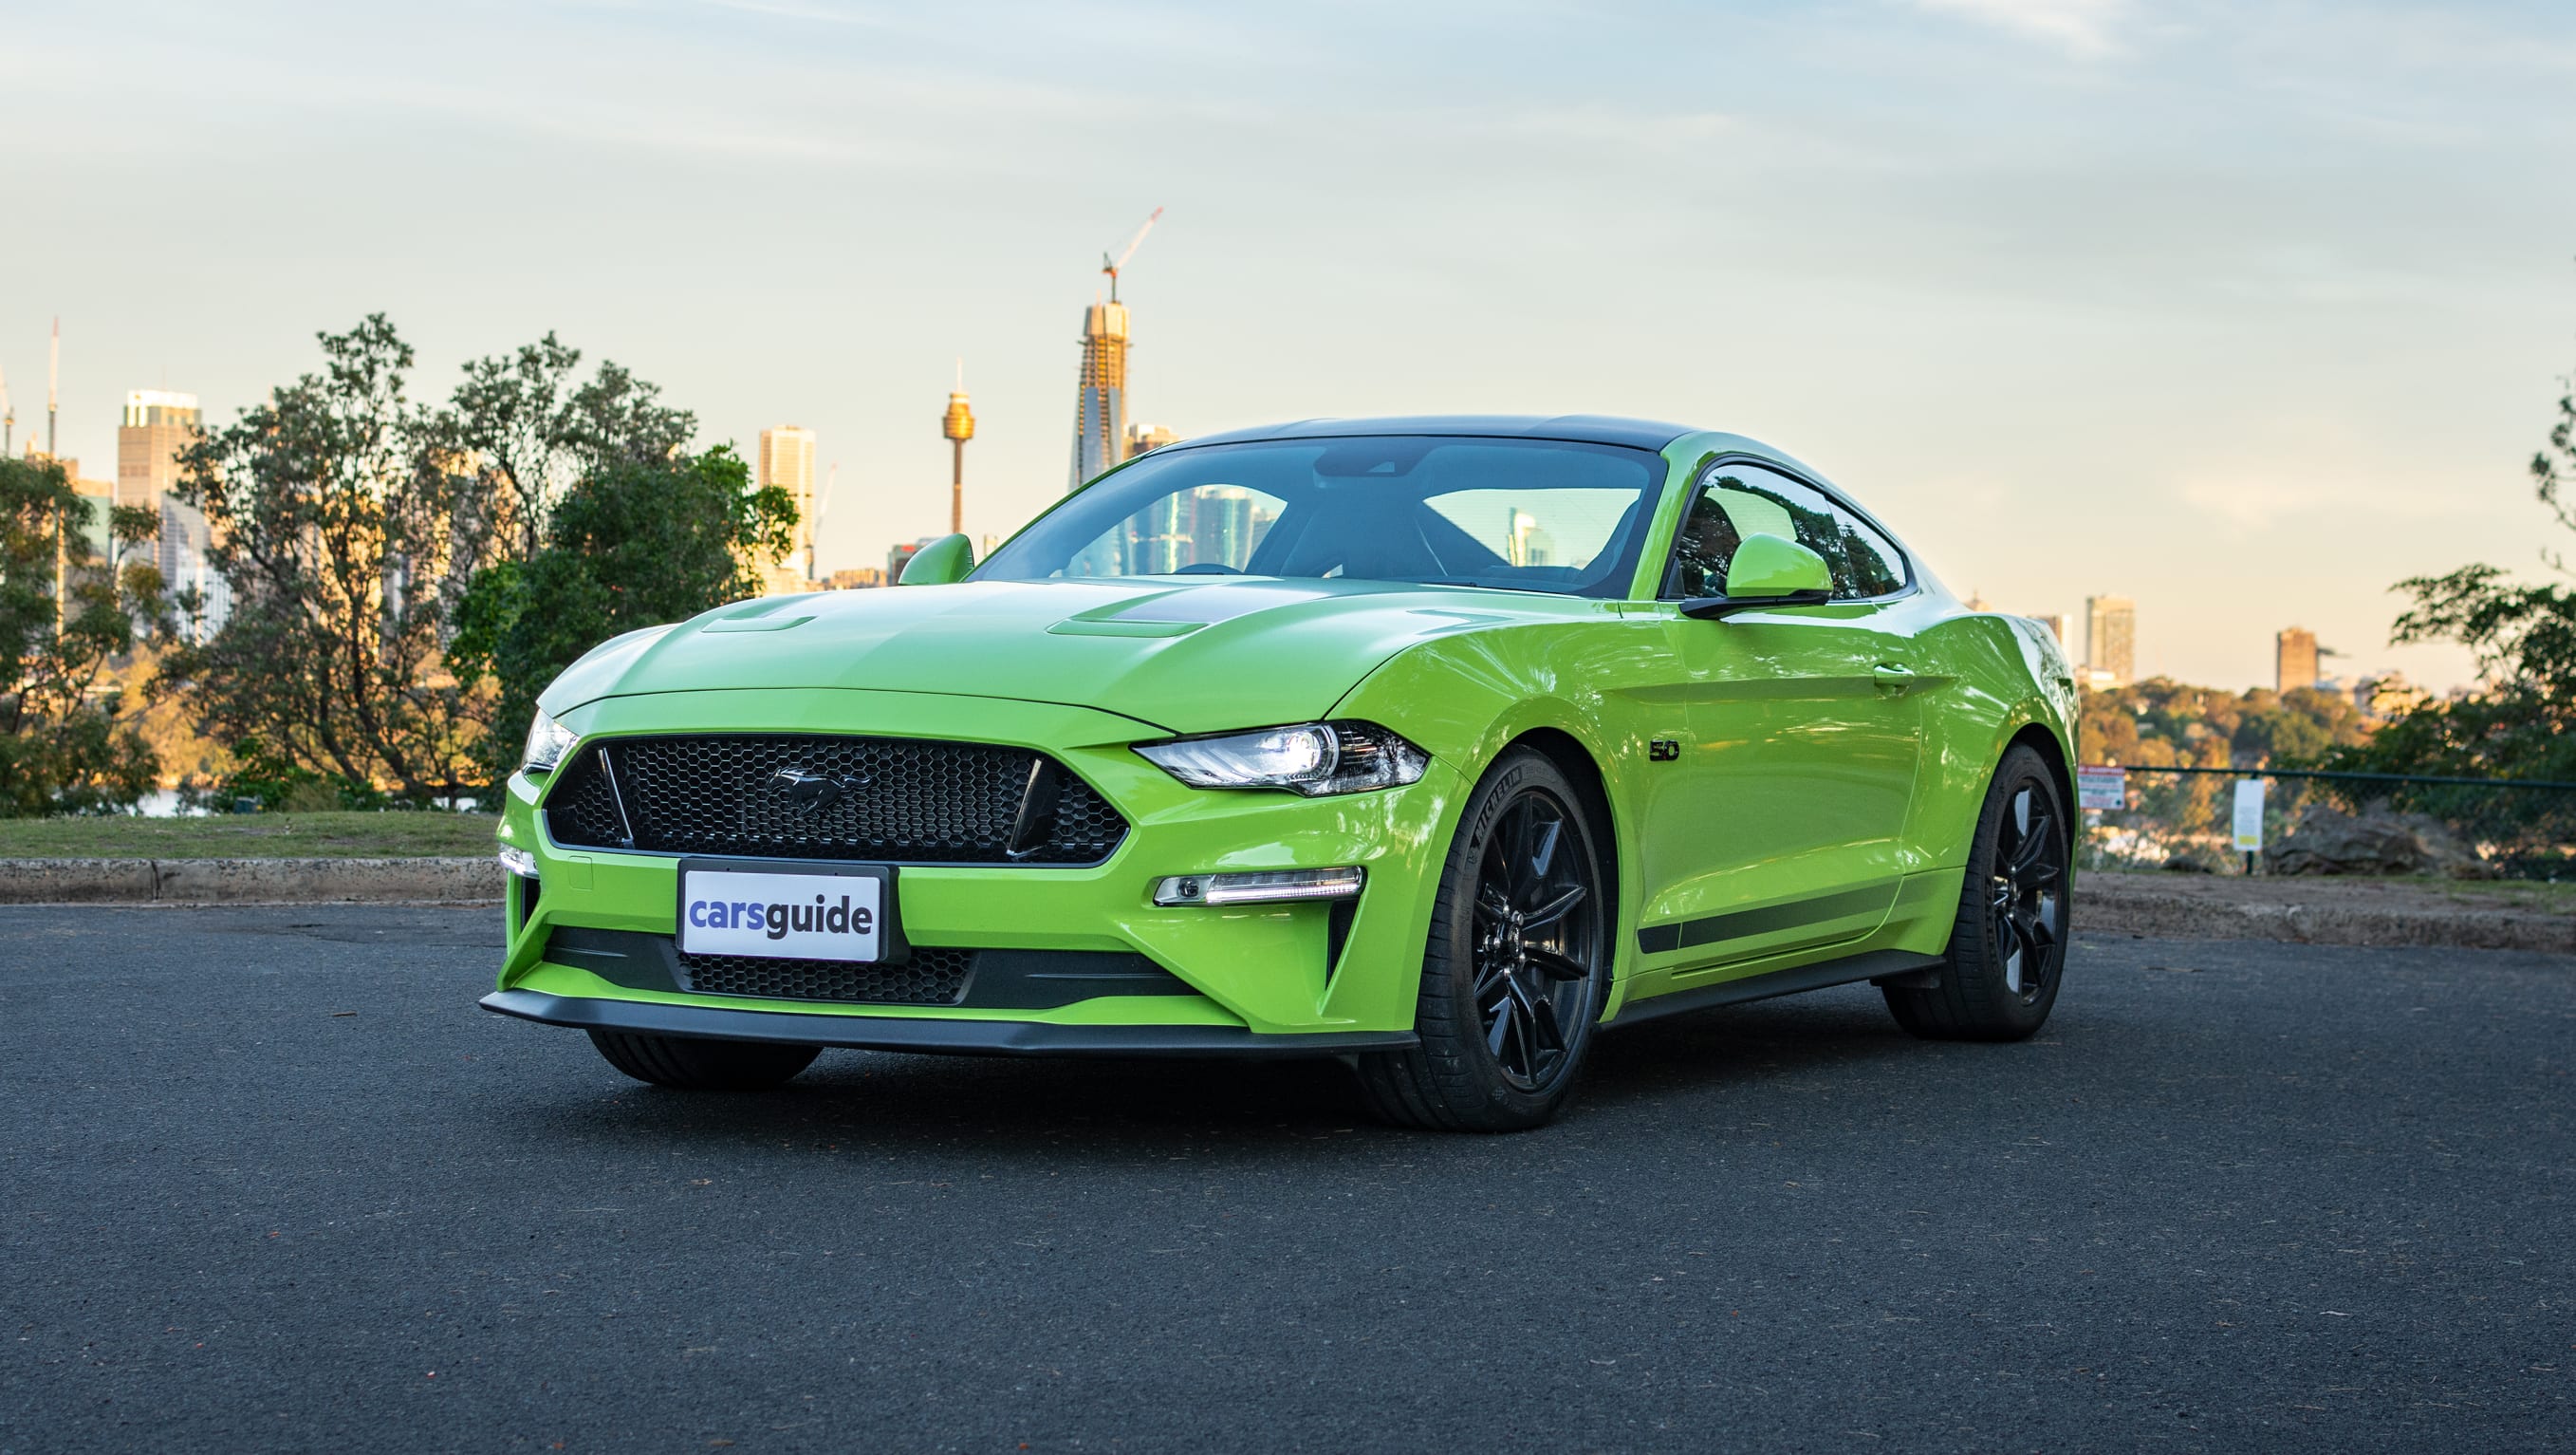 How fast is a V8 Mustang?